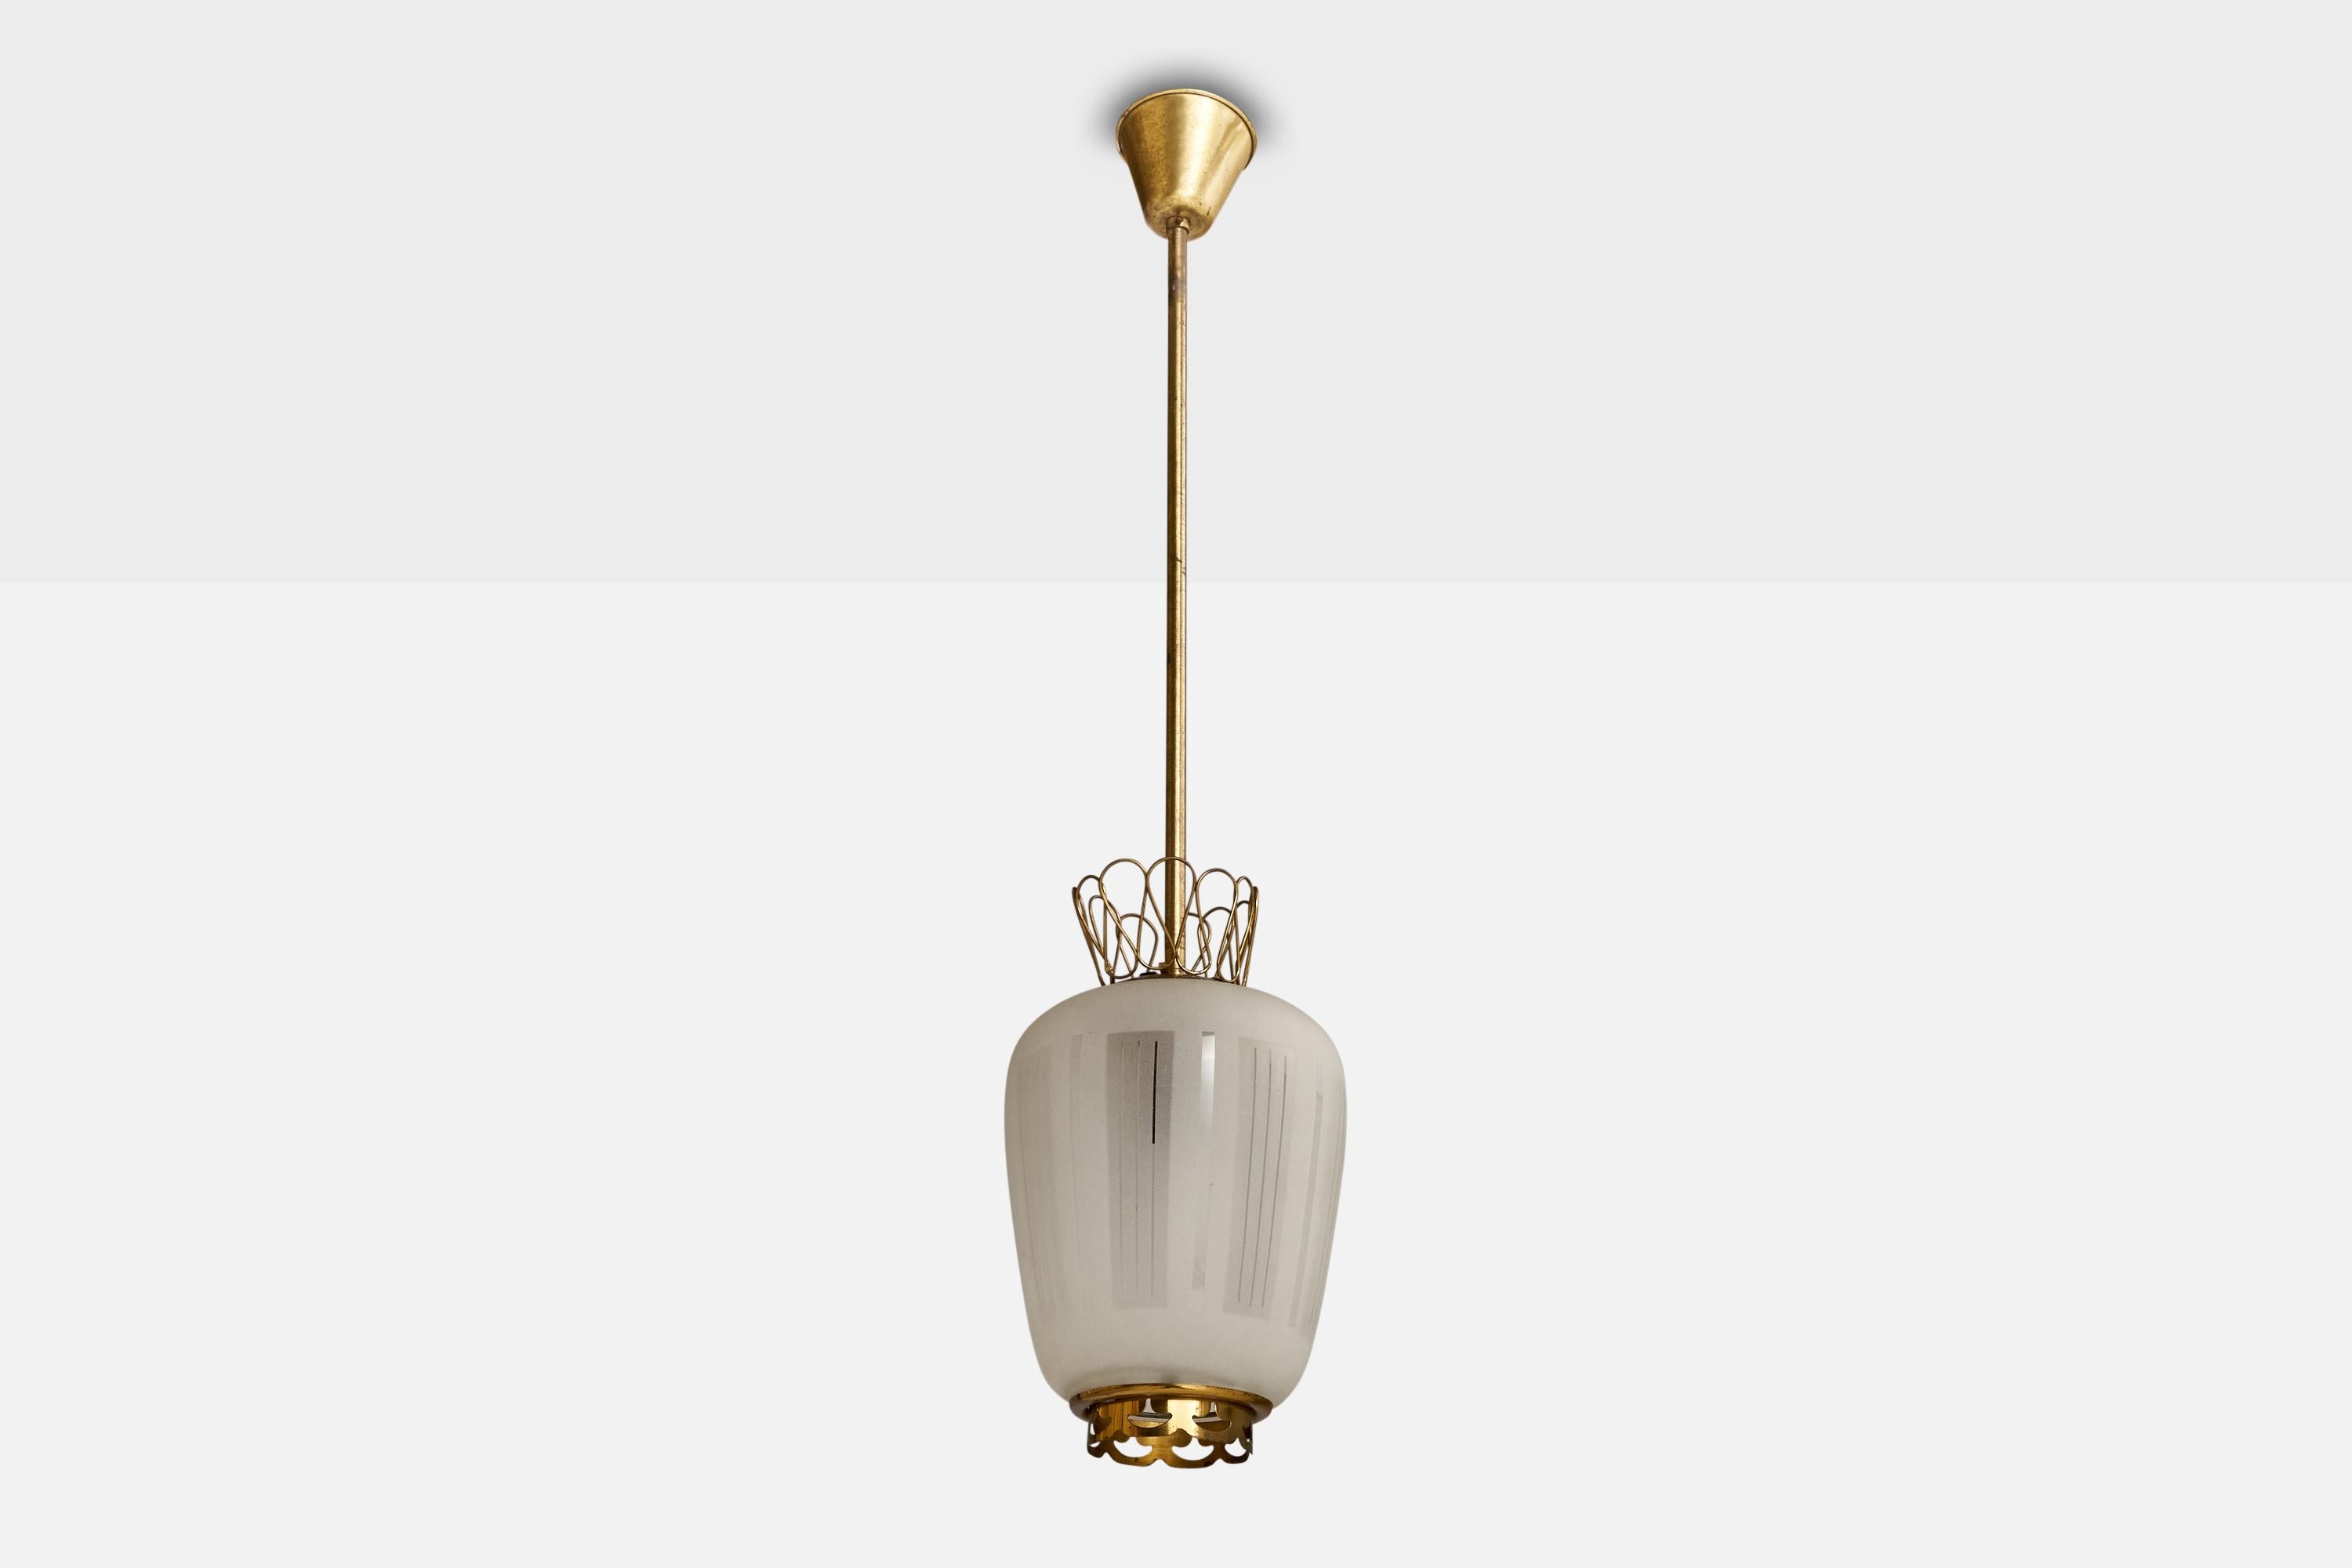 A brass and etched glass pendant light designed and produced in Sweden, 1930s.

Dimensions of canopy (inches): 3.25” H x 3.75” Diameter
Socket takes standard E-26 bulbs. 1 socket.There is no maximum wattage stated on the fixture. All lighting will